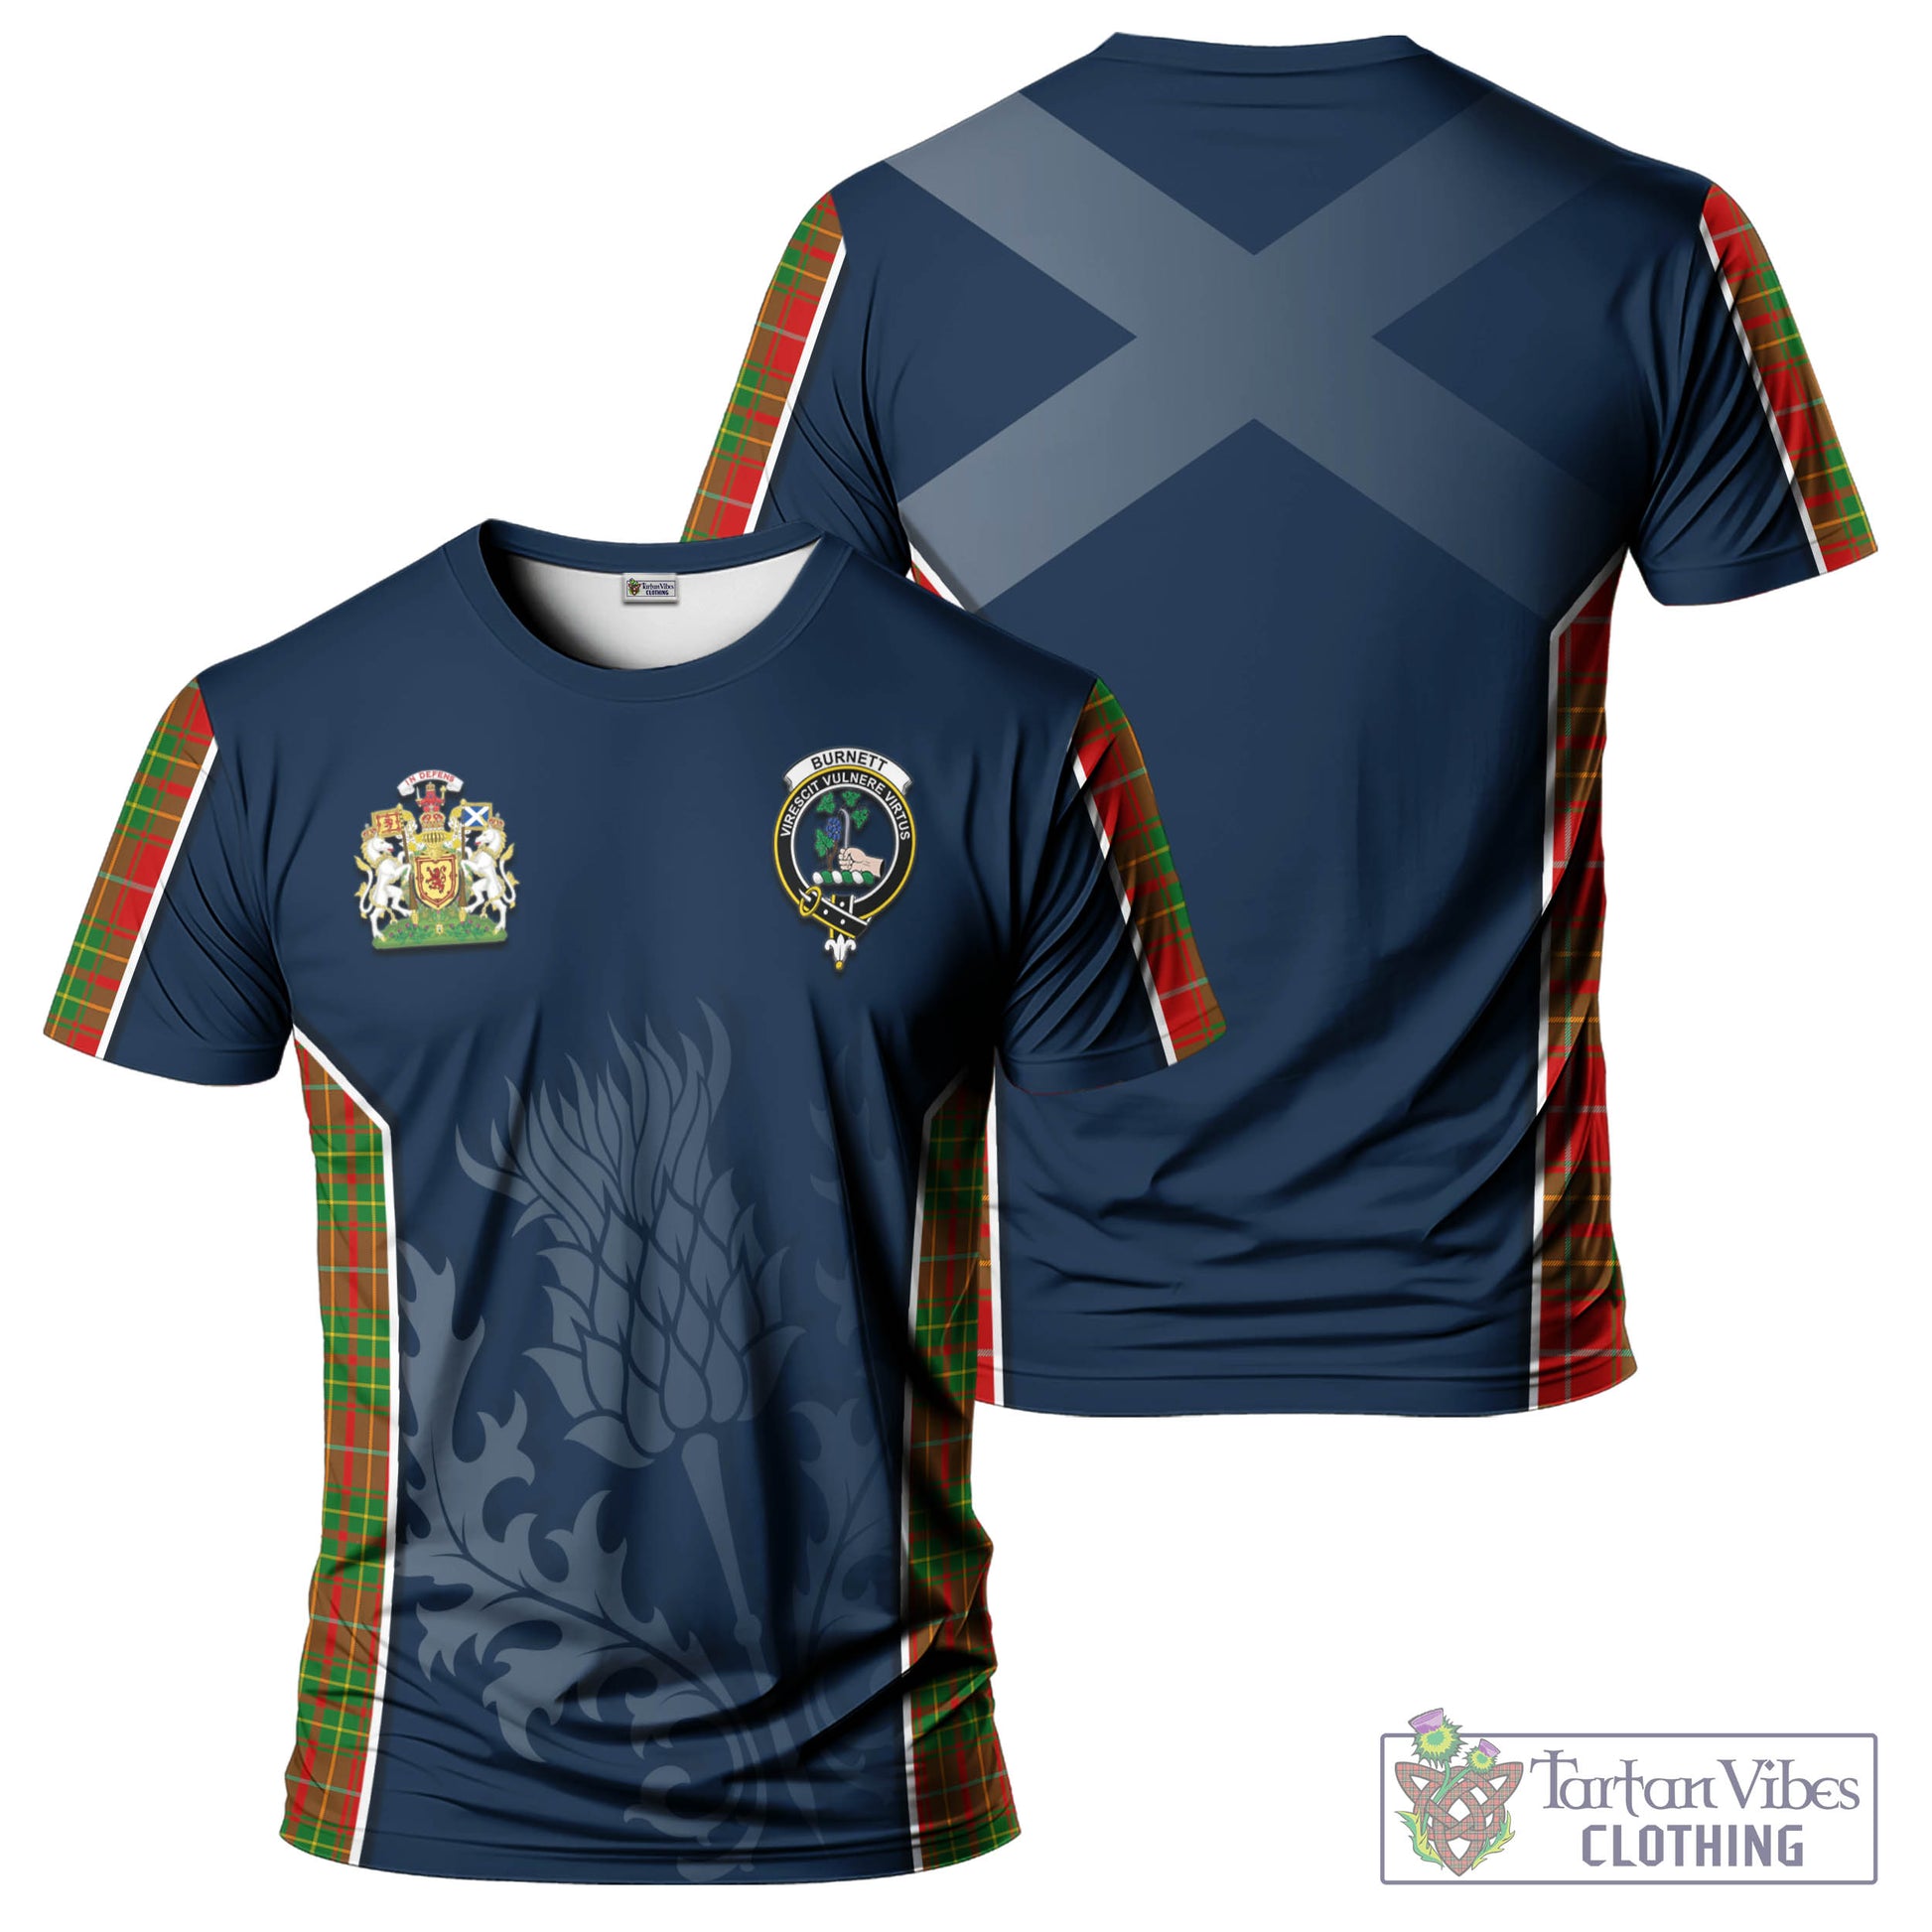 Tartan Vibes Clothing Burnett Ancient Tartan T-Shirt with Family Crest and Scottish Thistle Vibes Sport Style